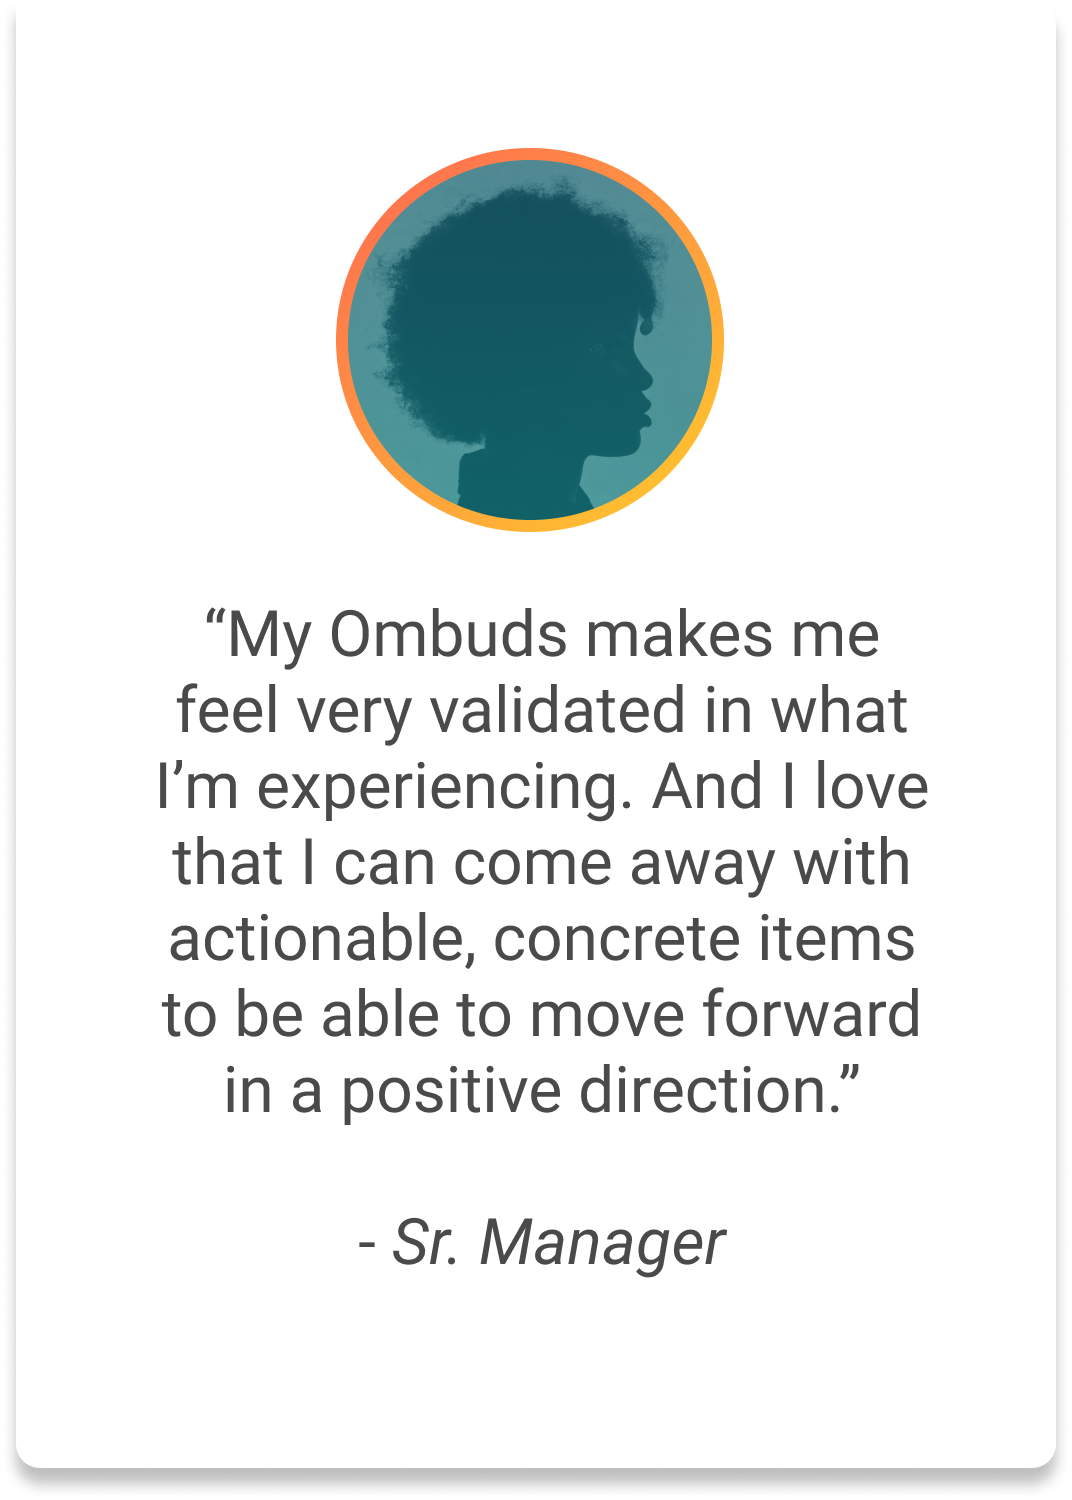 Employee testimonial on ombuds services.